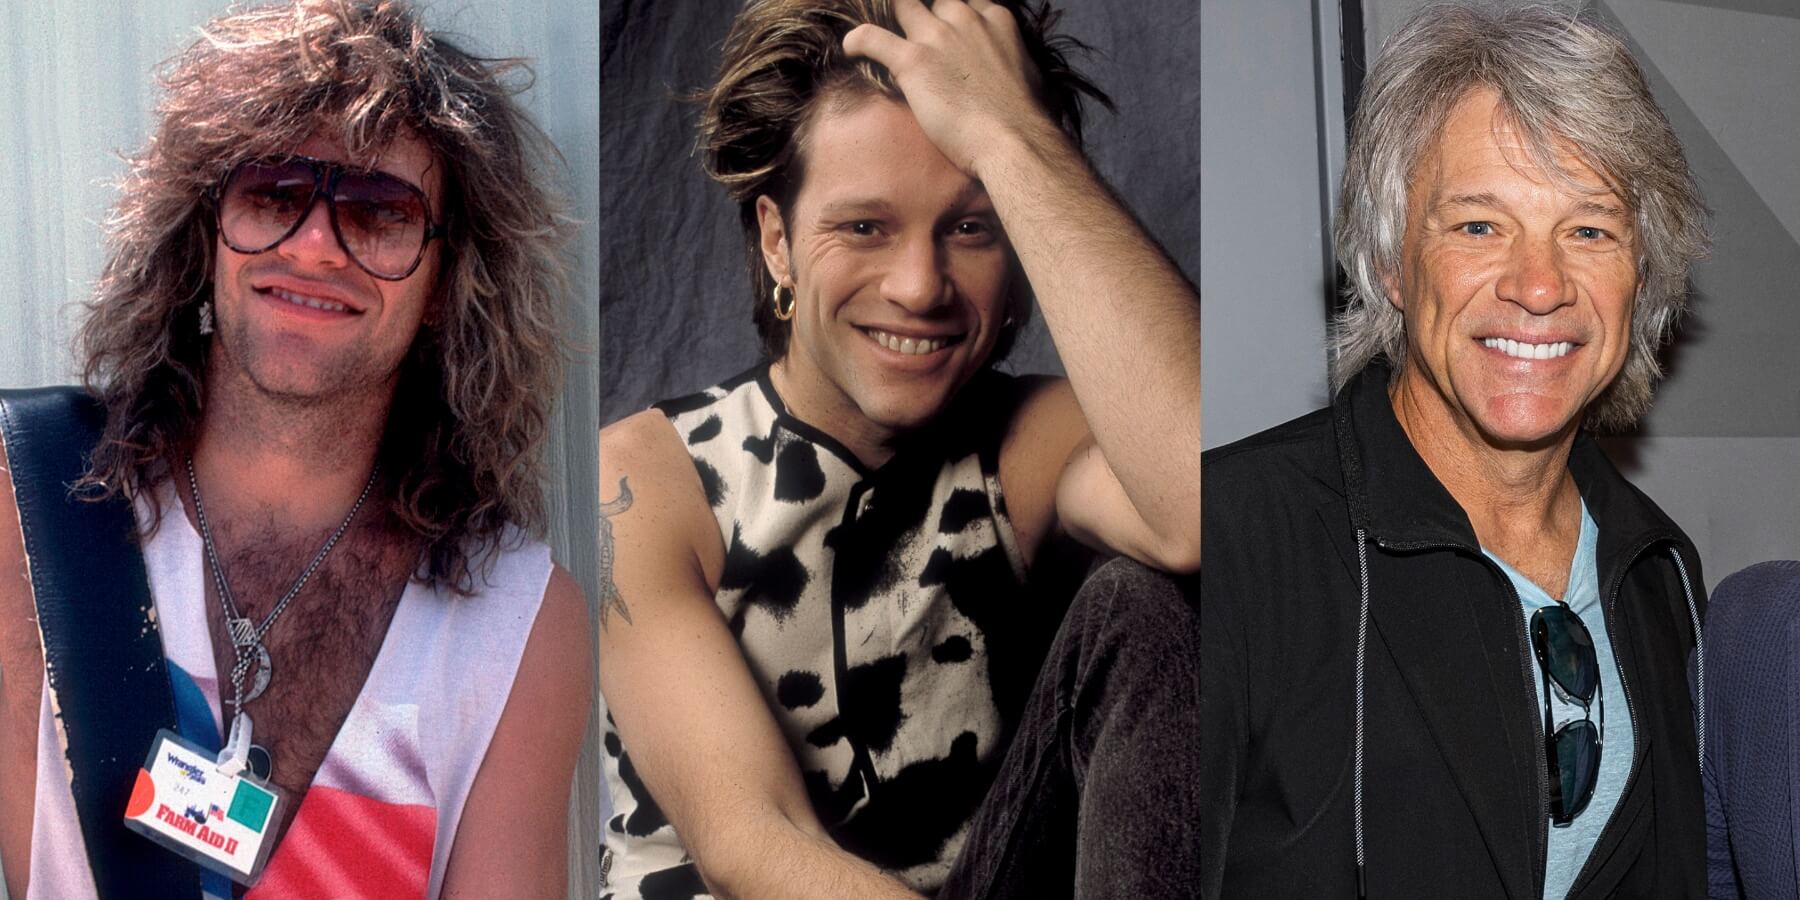 Jon Bon Jovi photographed during the various stages of his career